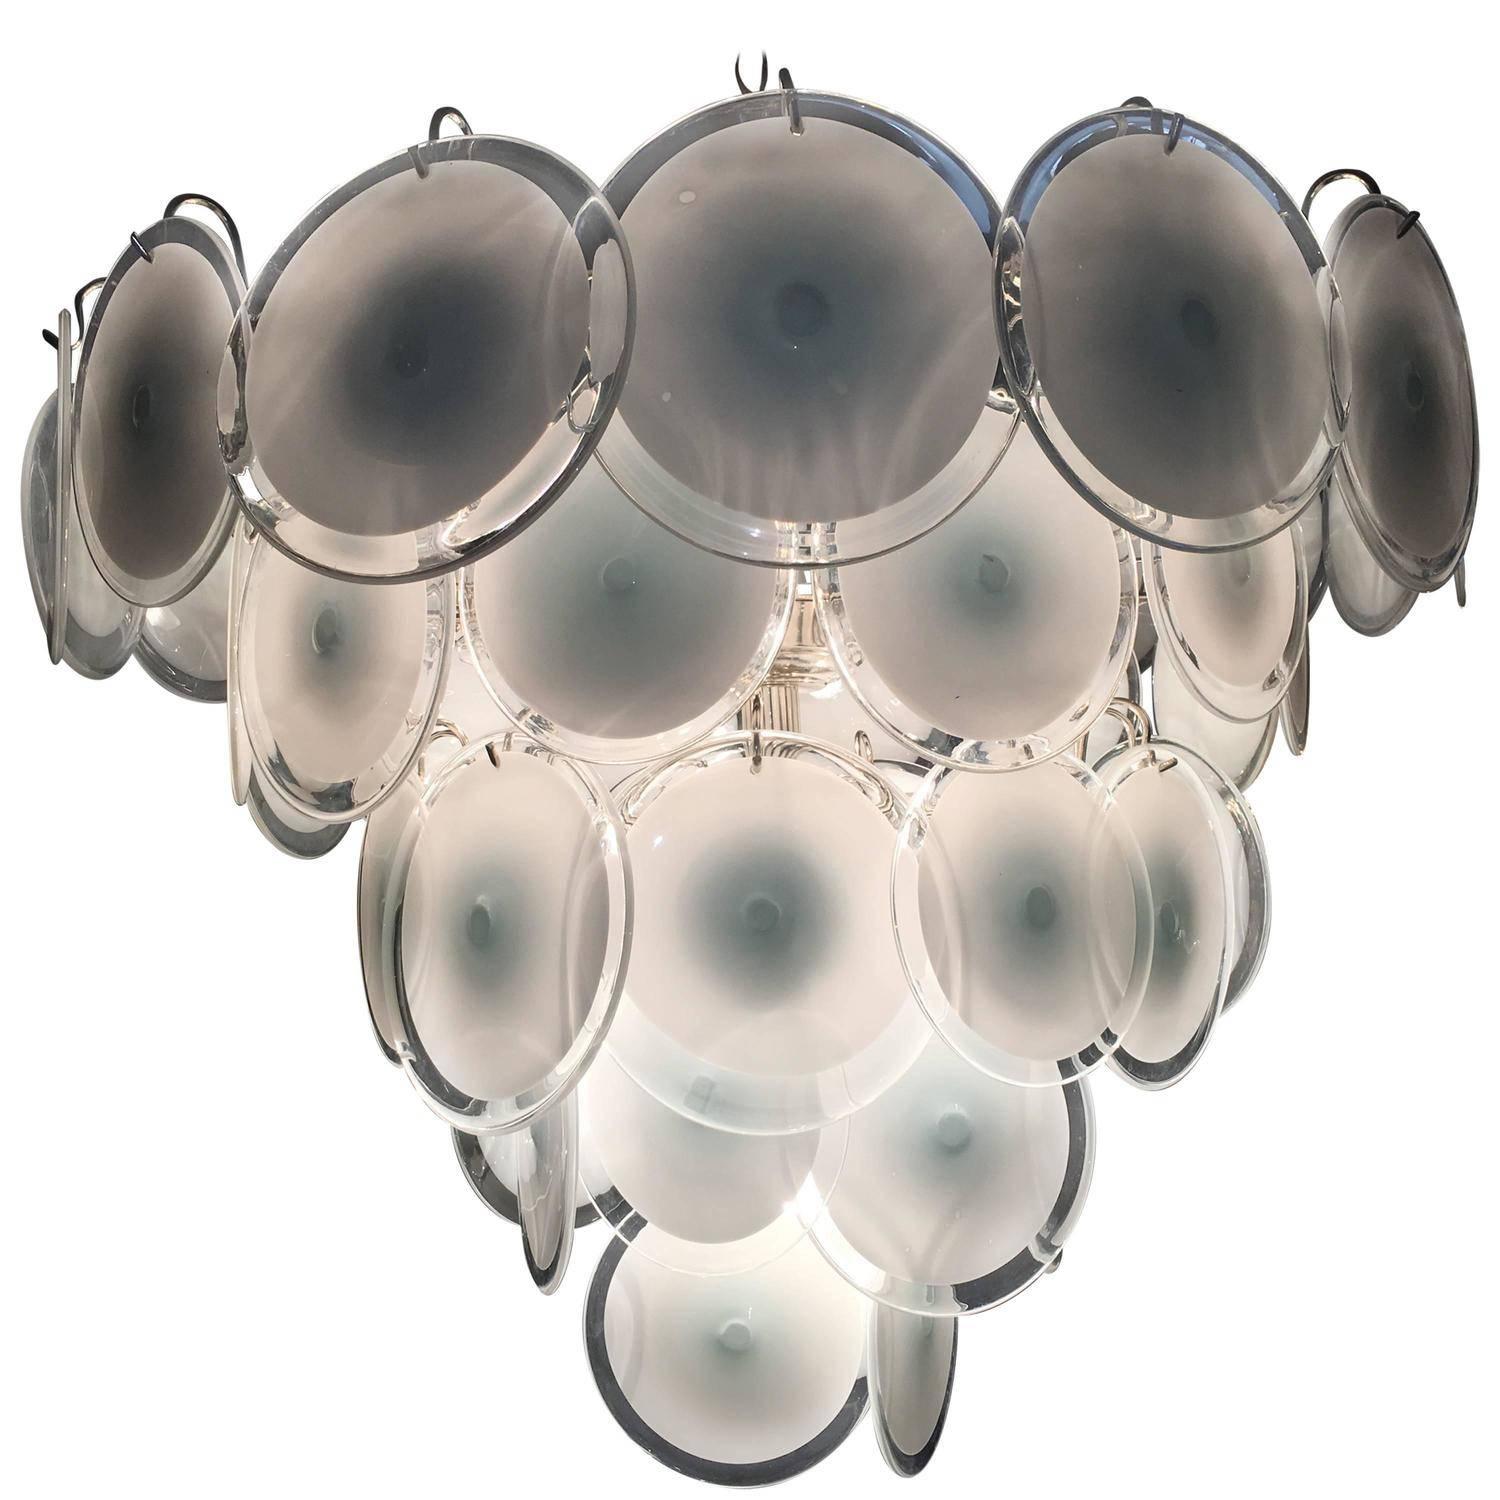 Spectacular chandelier by Vistosi made of 50 Murano discs white put on five floors.
Available also a pair and a pair od wall scones on request.
Nine E14 light bulbs. 